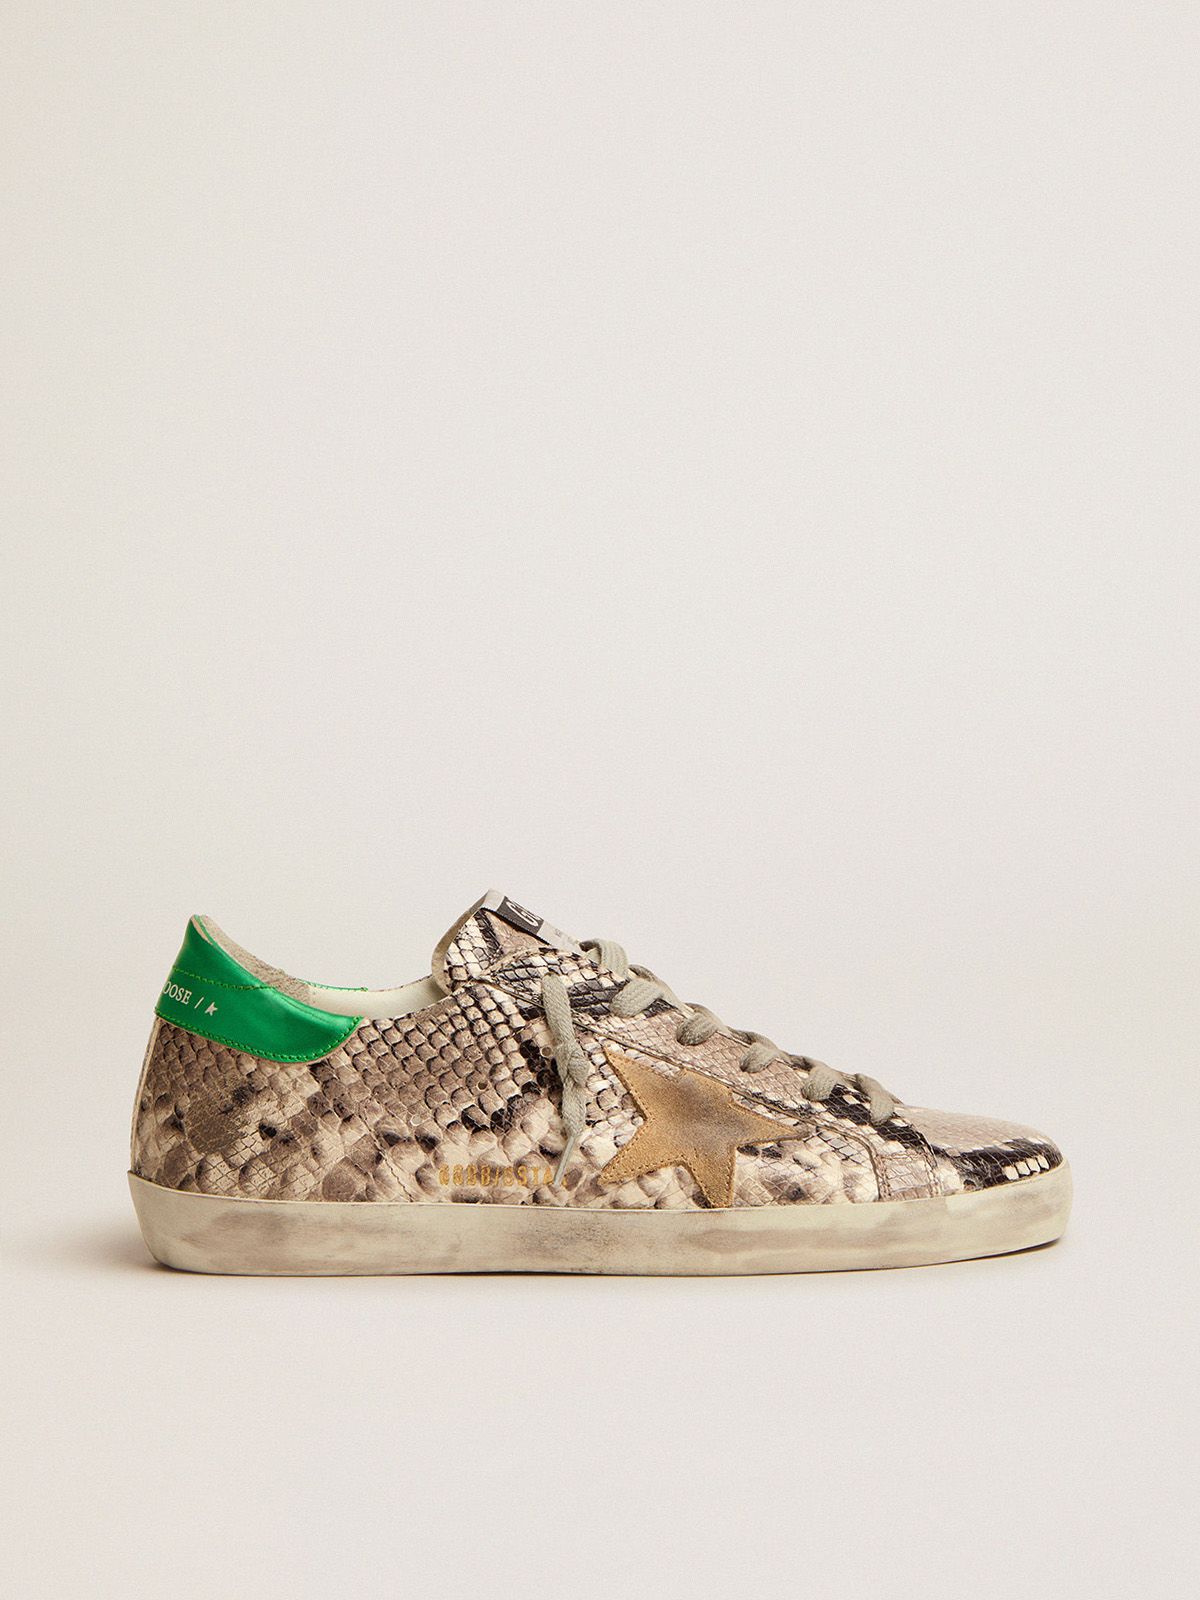 Sneakers Uomo Golden Goose Super-Star LTD sneakers with snake-print leather upper and green laminated leather heel tab